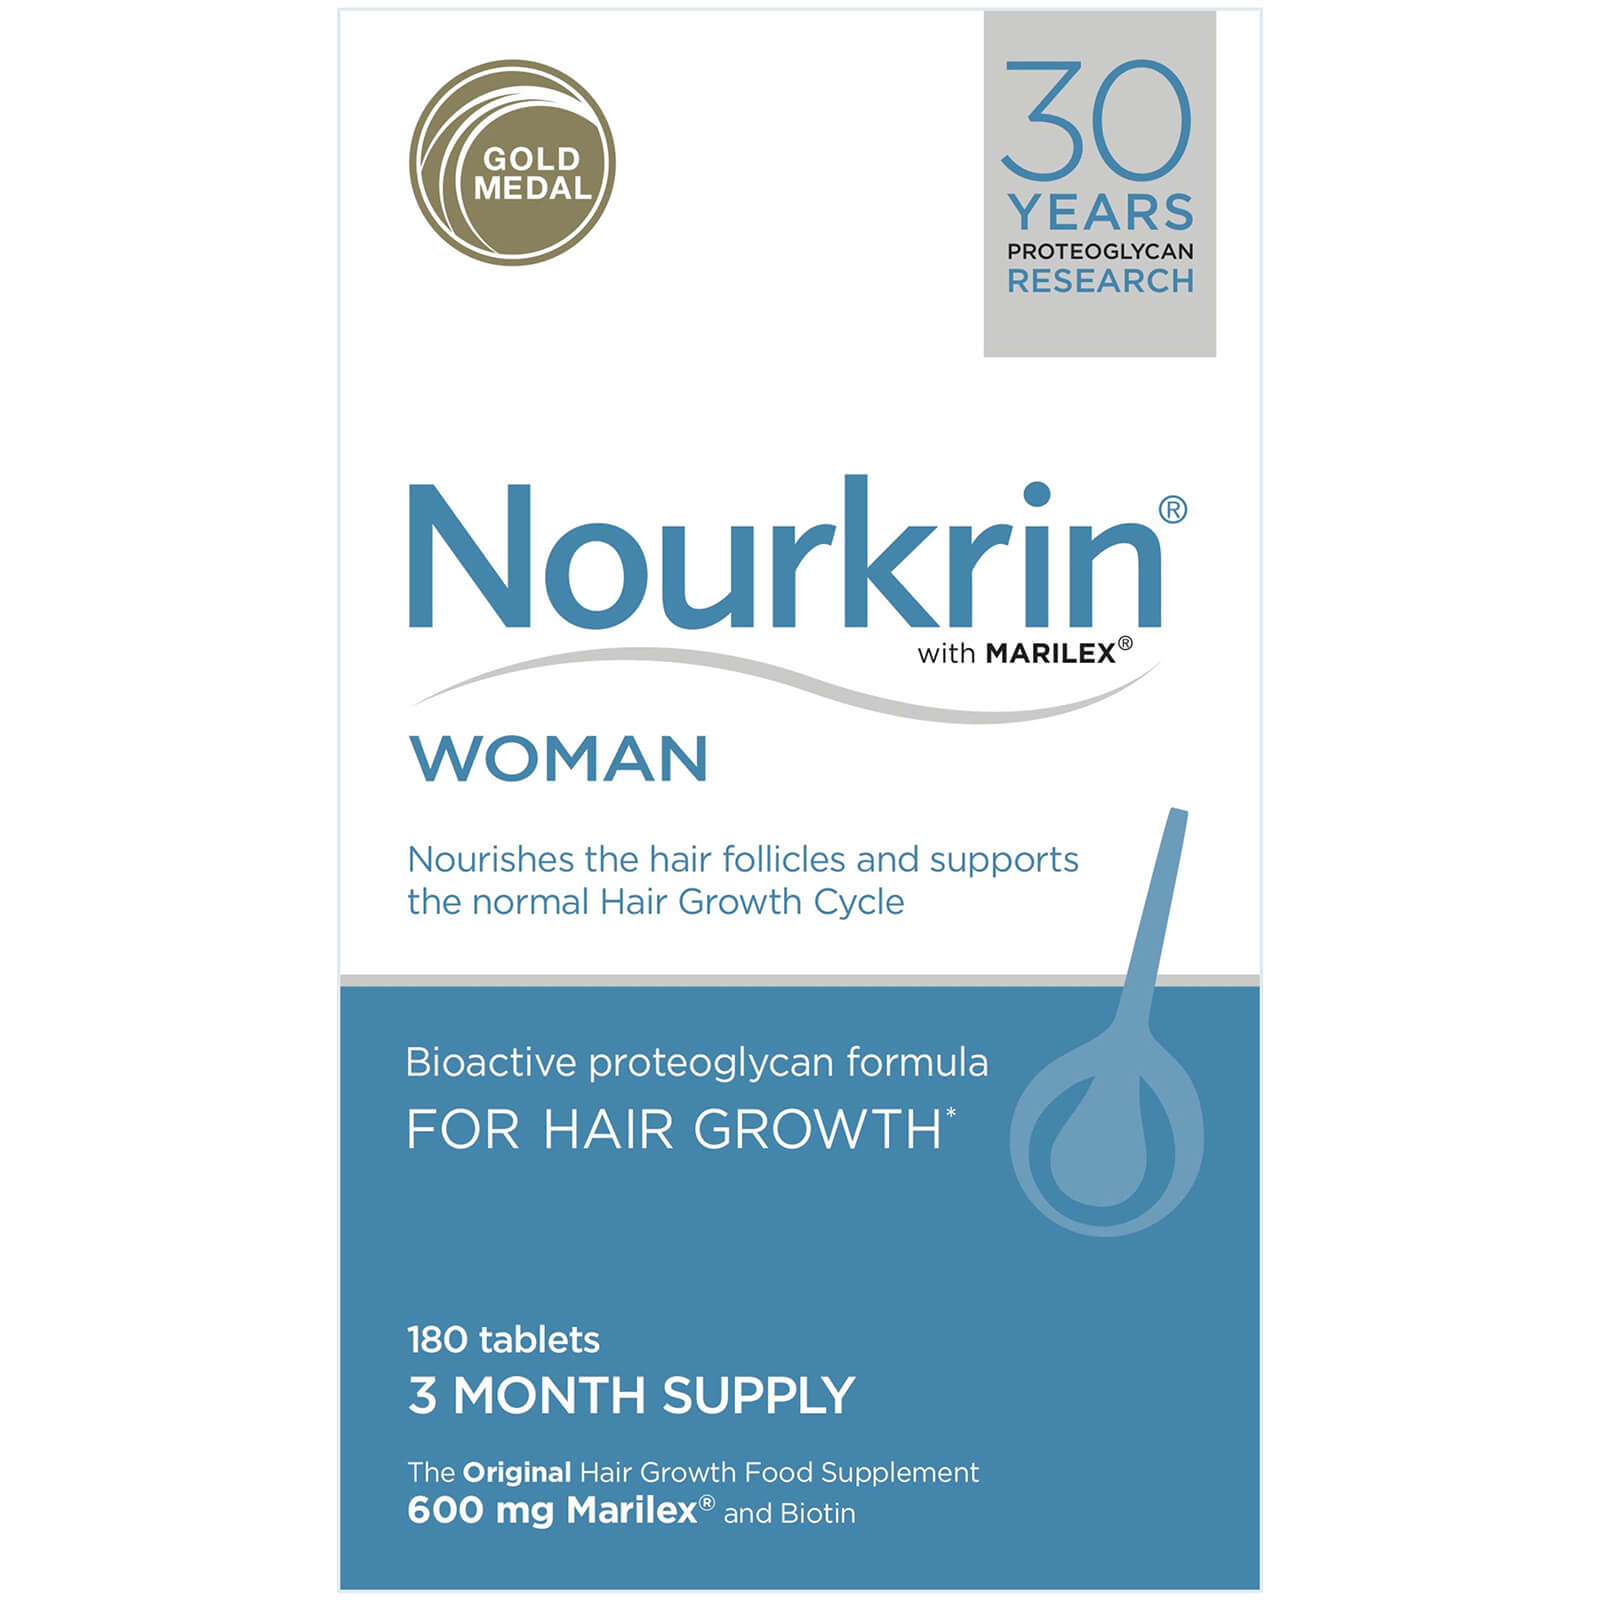 Photos - Hair Product Nourkrin Woman - 3 Month Supply  2NK-0224(180 Tablets)